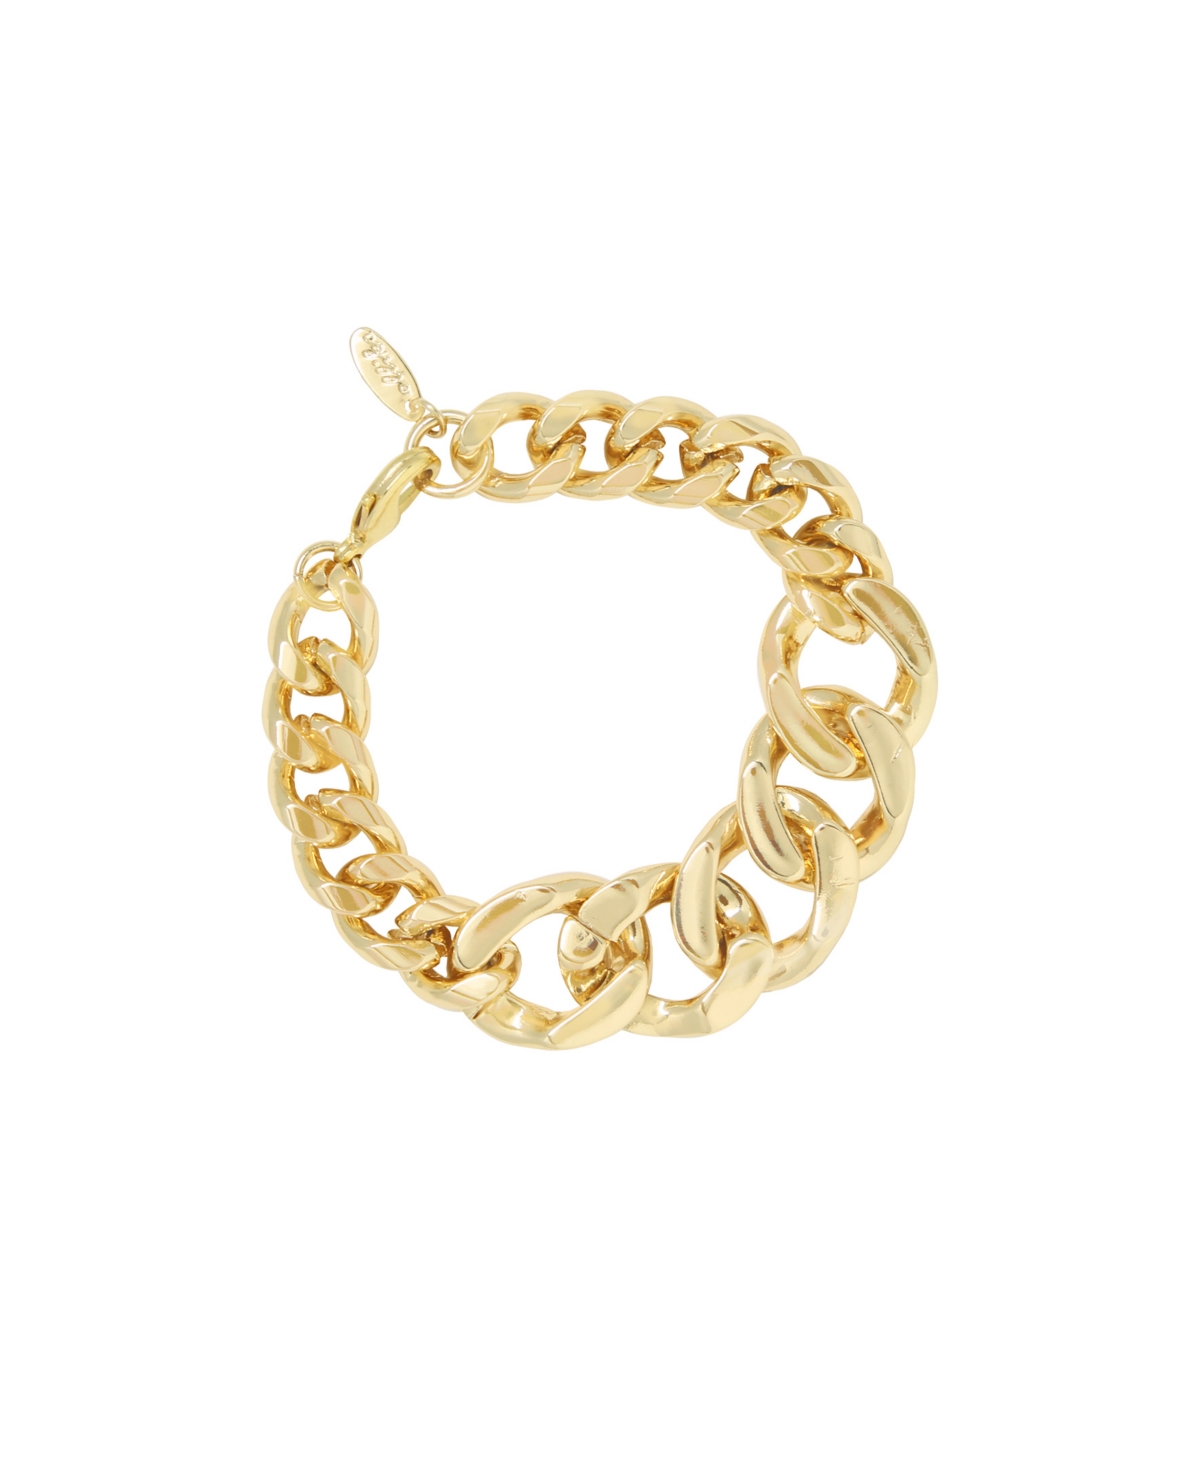 Big And Bold Chain Link Women's Bracelet - Gold